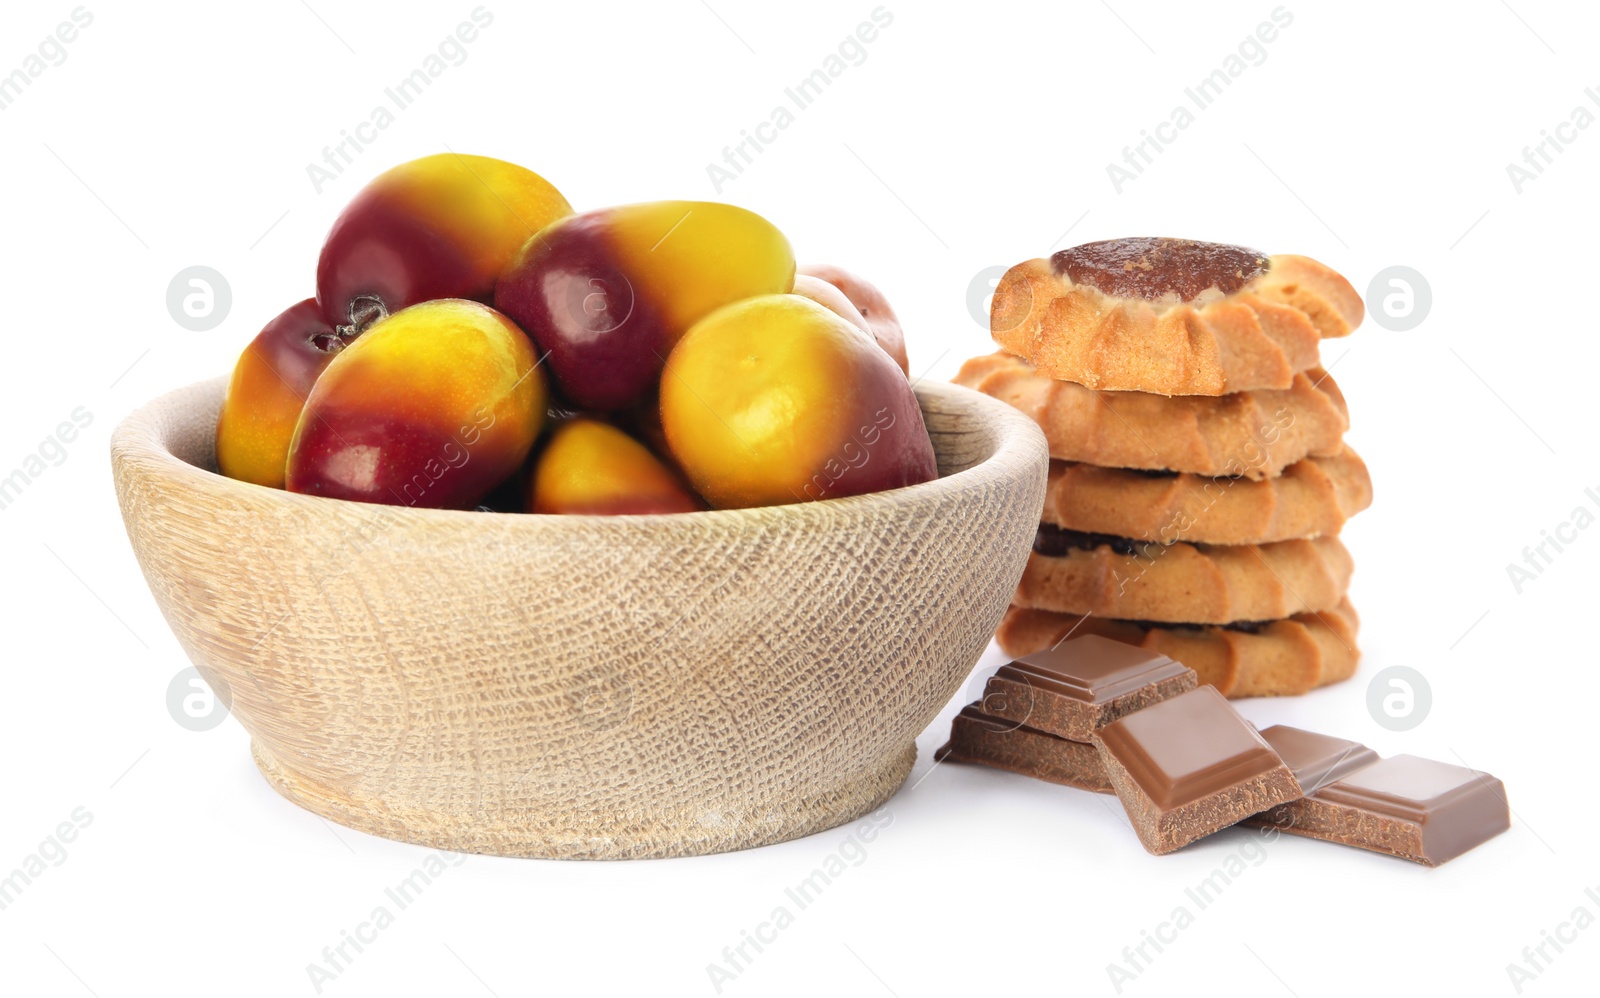 Image of Fresh ripe palm oil fruits and sweets on white background